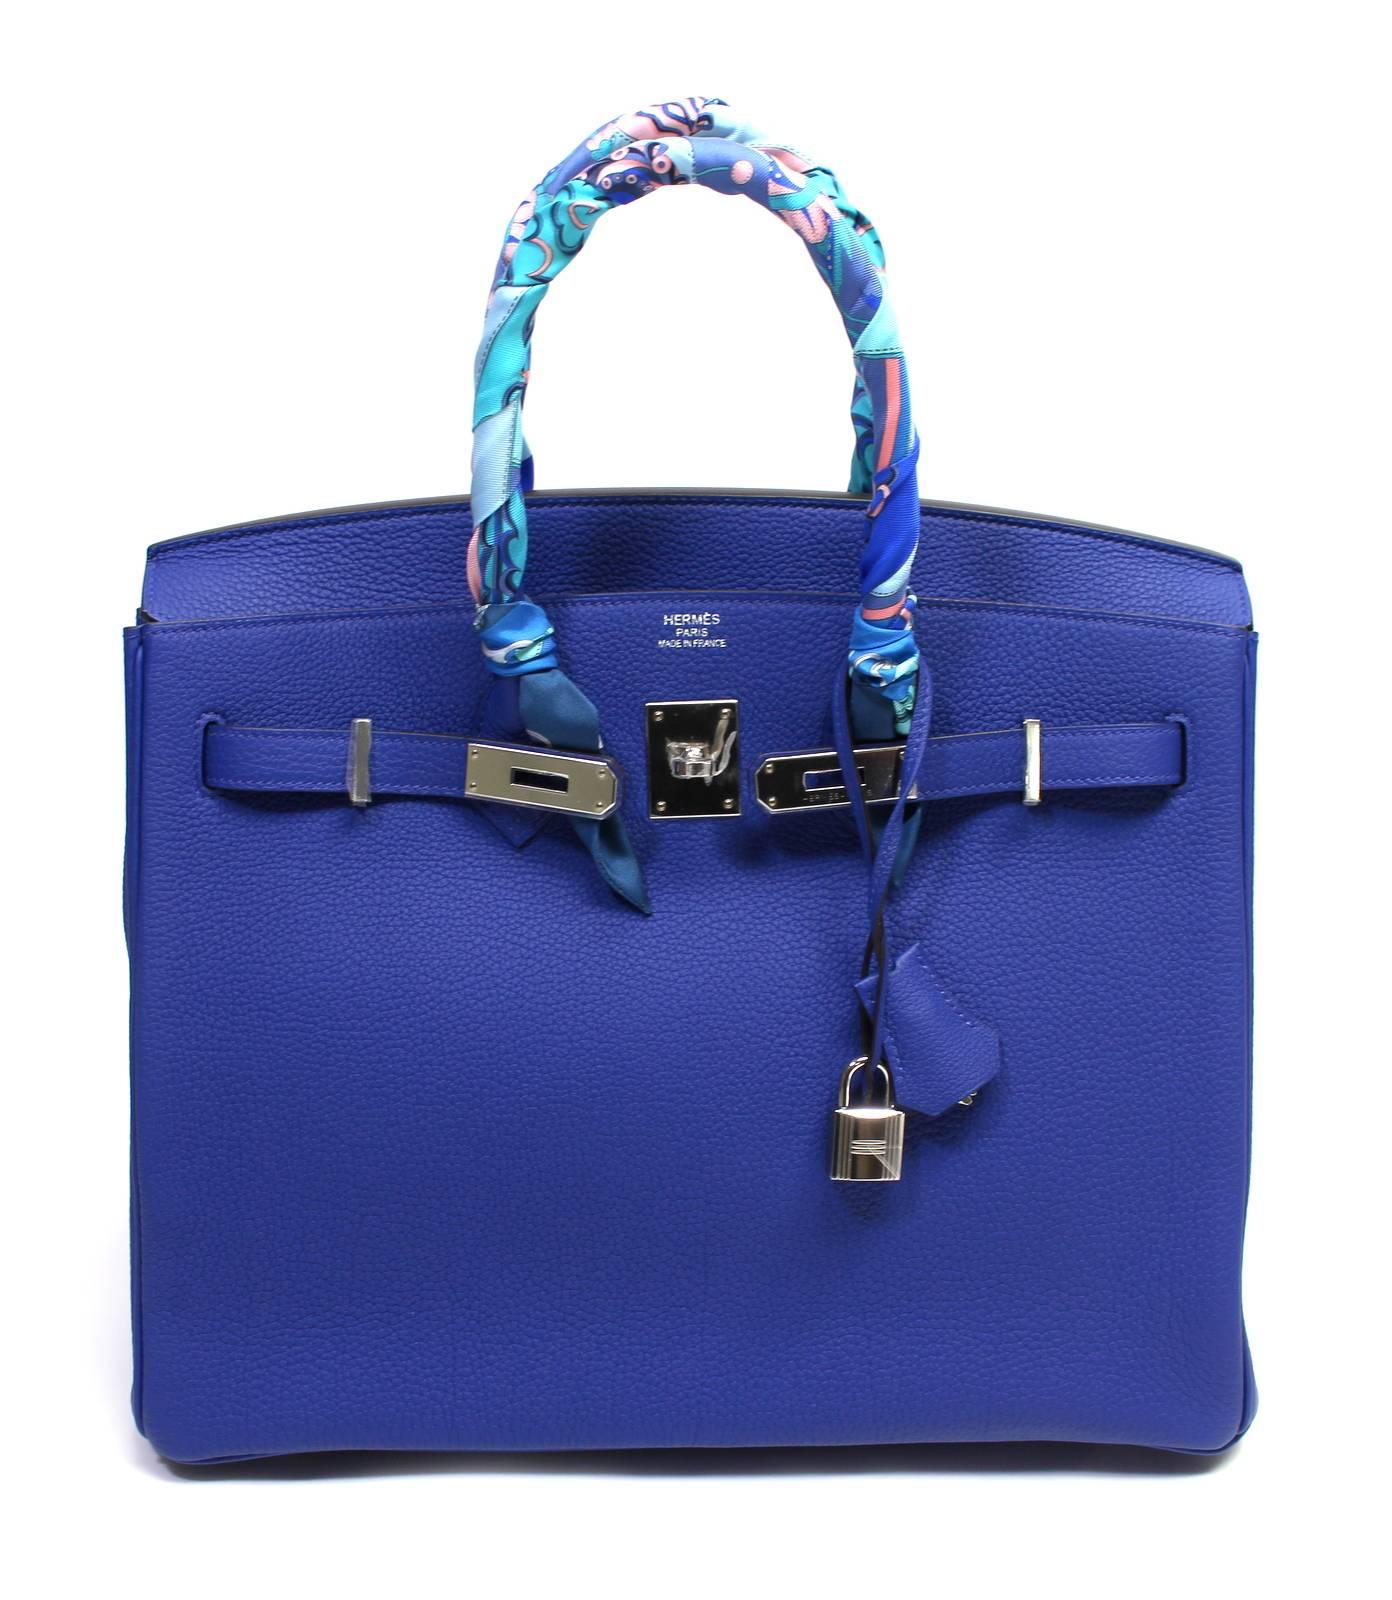 Hermès 35 cm Blue Electrique Togo Birkin is in PRISTINE UNWORN condition.   Protective plastic is intact on the hardware; STORE FRESH.
Considered the ultimate luxury item the world over and hand stitched by skilled craftsmen, wait lists for the